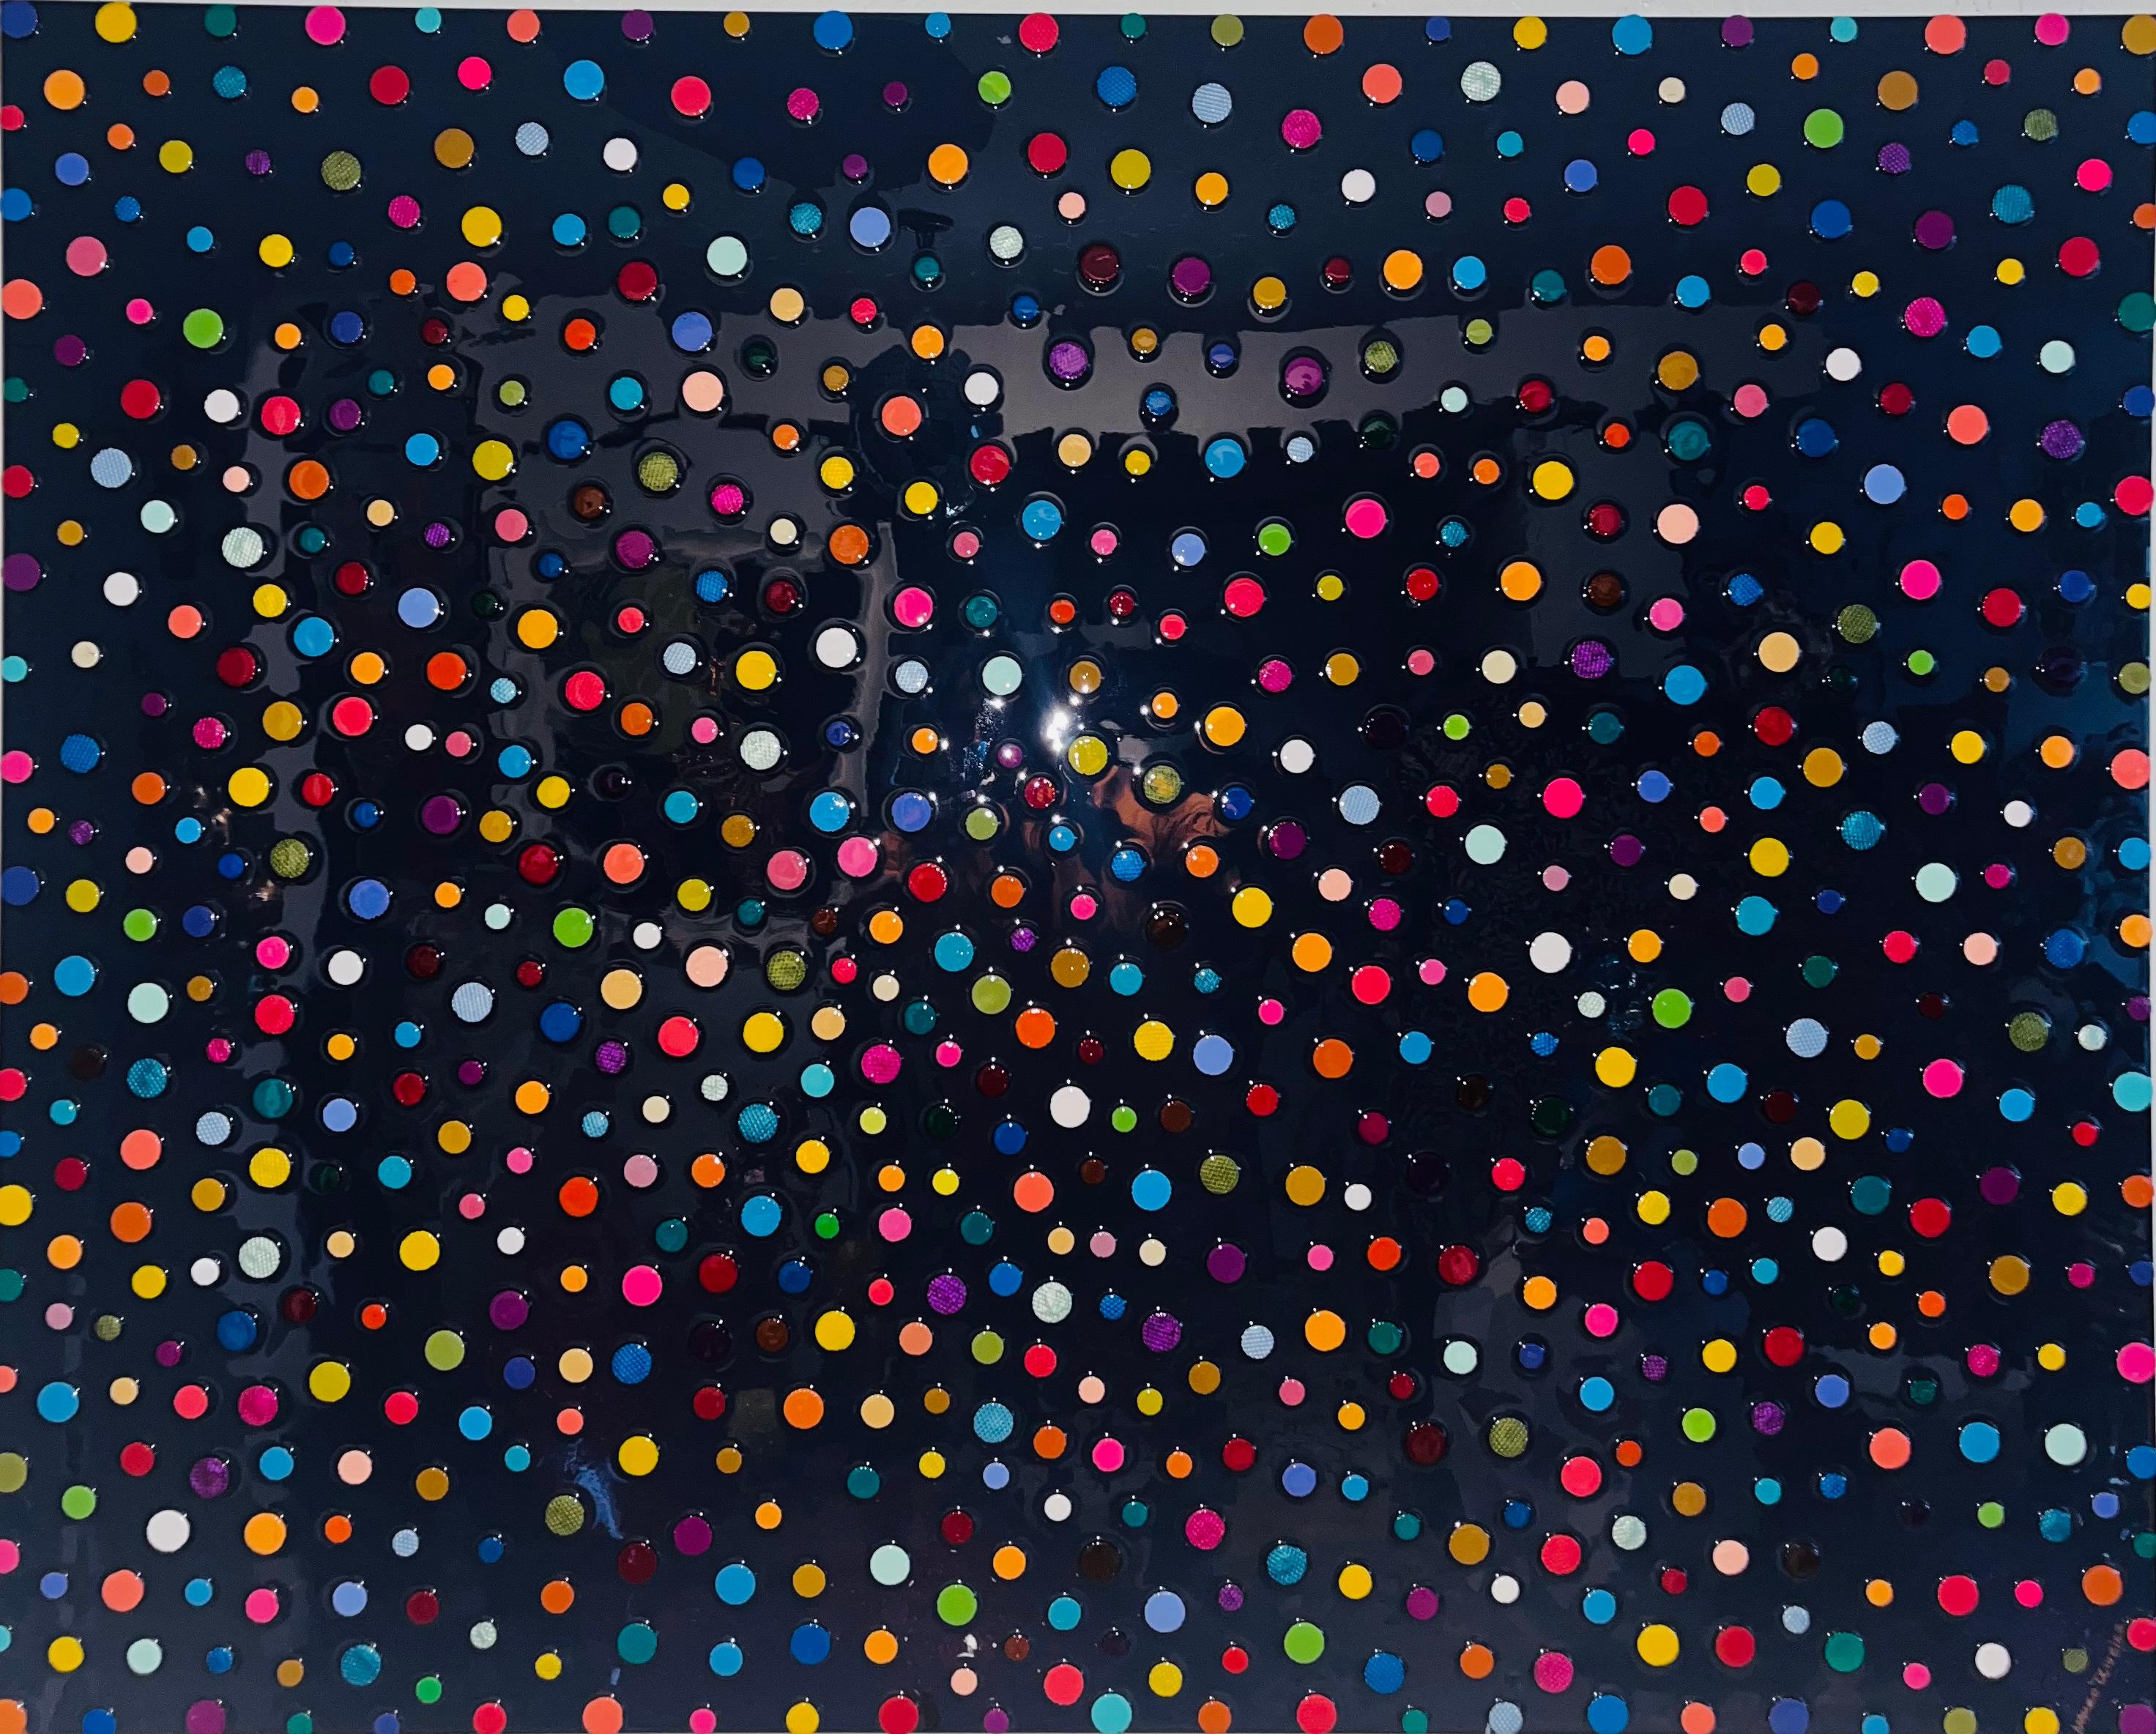                  **ANNUAL SUPER SALE TIL MAY 15th ONLY**
*This Price Won't Be Repeated Again This Year - Take Advantage Of It*

A handful of artist 'masters' colorful dots but all or most are done by machines/printers. Oliveira dots are done and